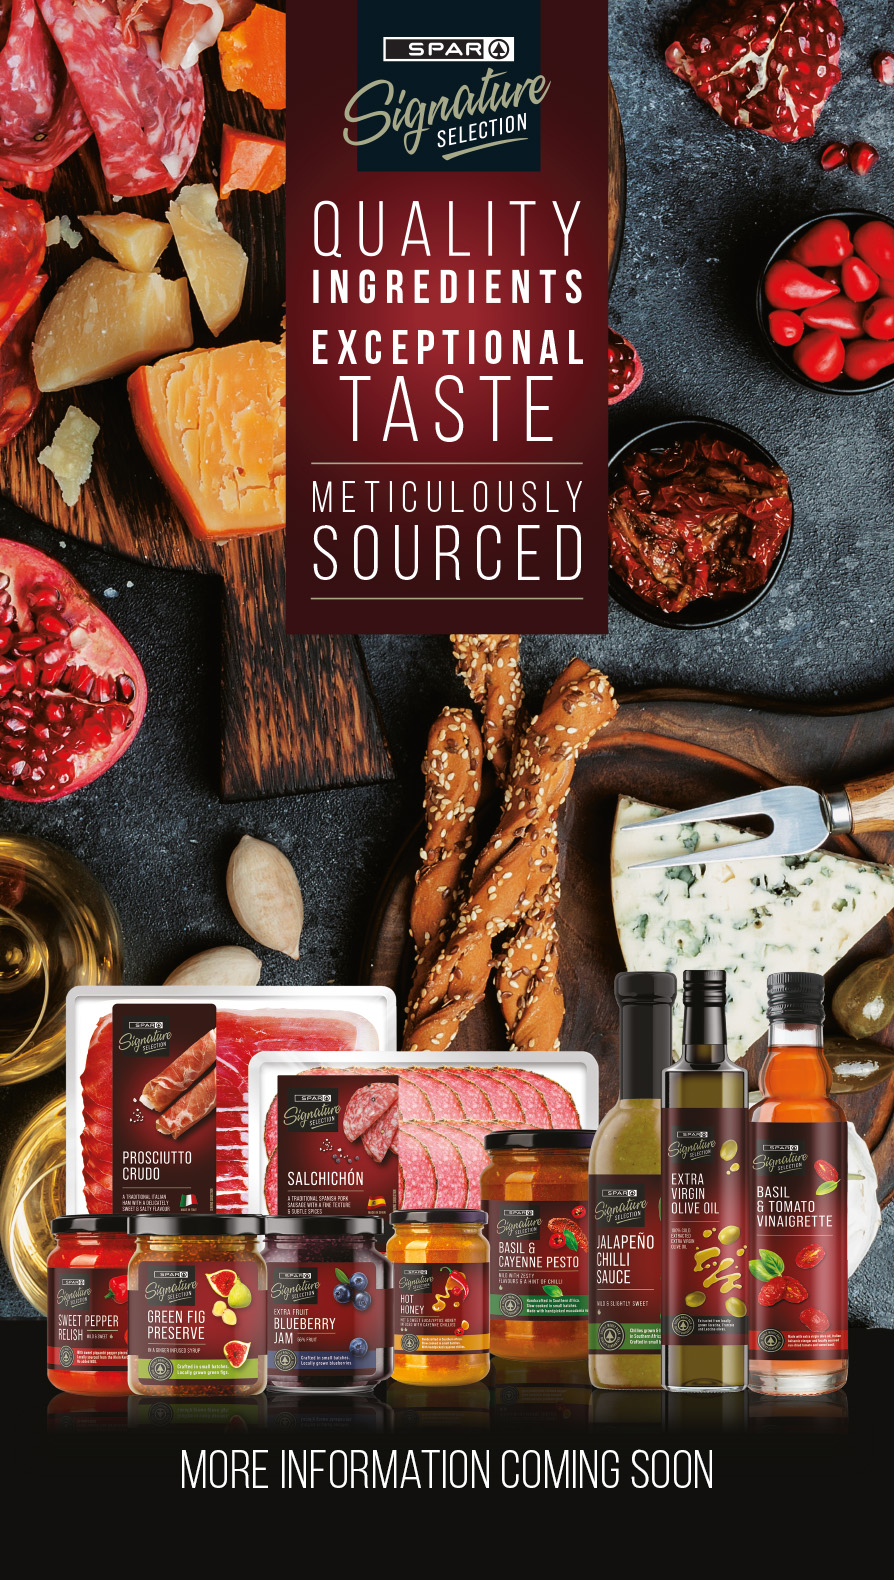 SPAR Signature Selection. Quality ingredients. Exceptional taste. Meticulously sourced.